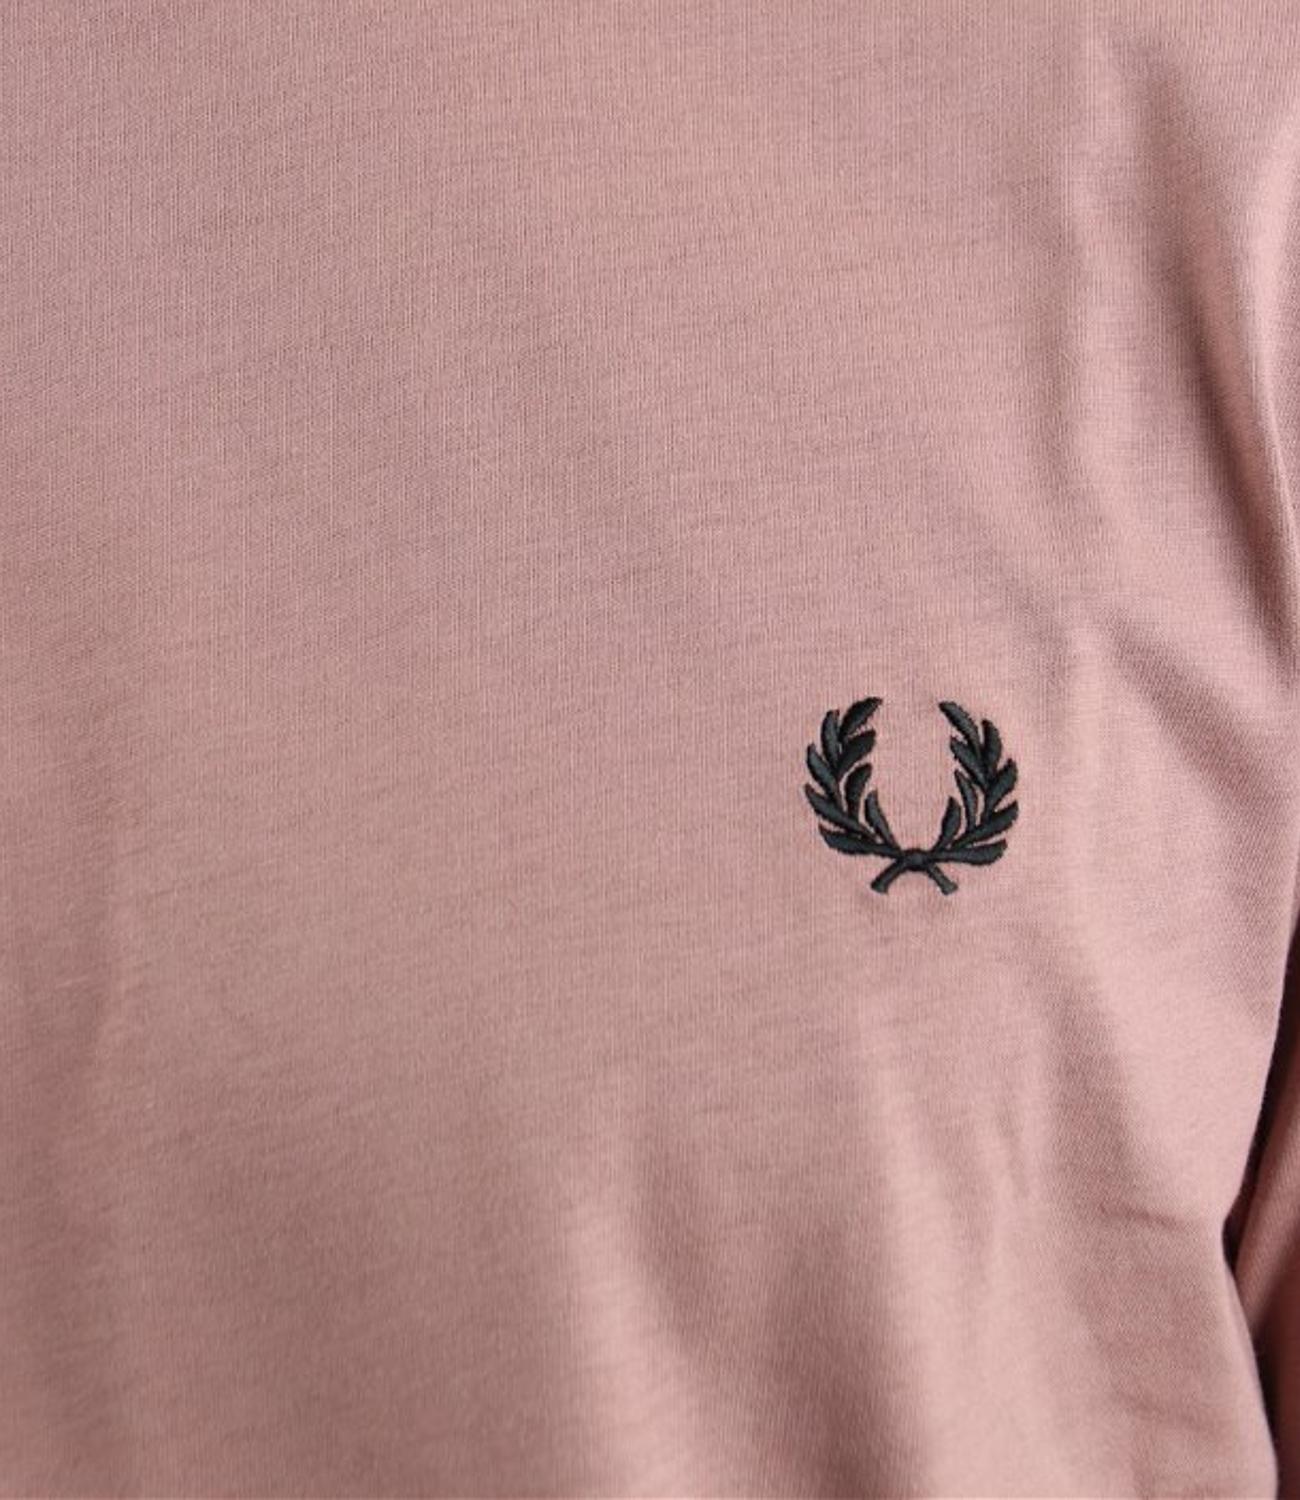 Fred Perry t-shirt rosa scuro uomo